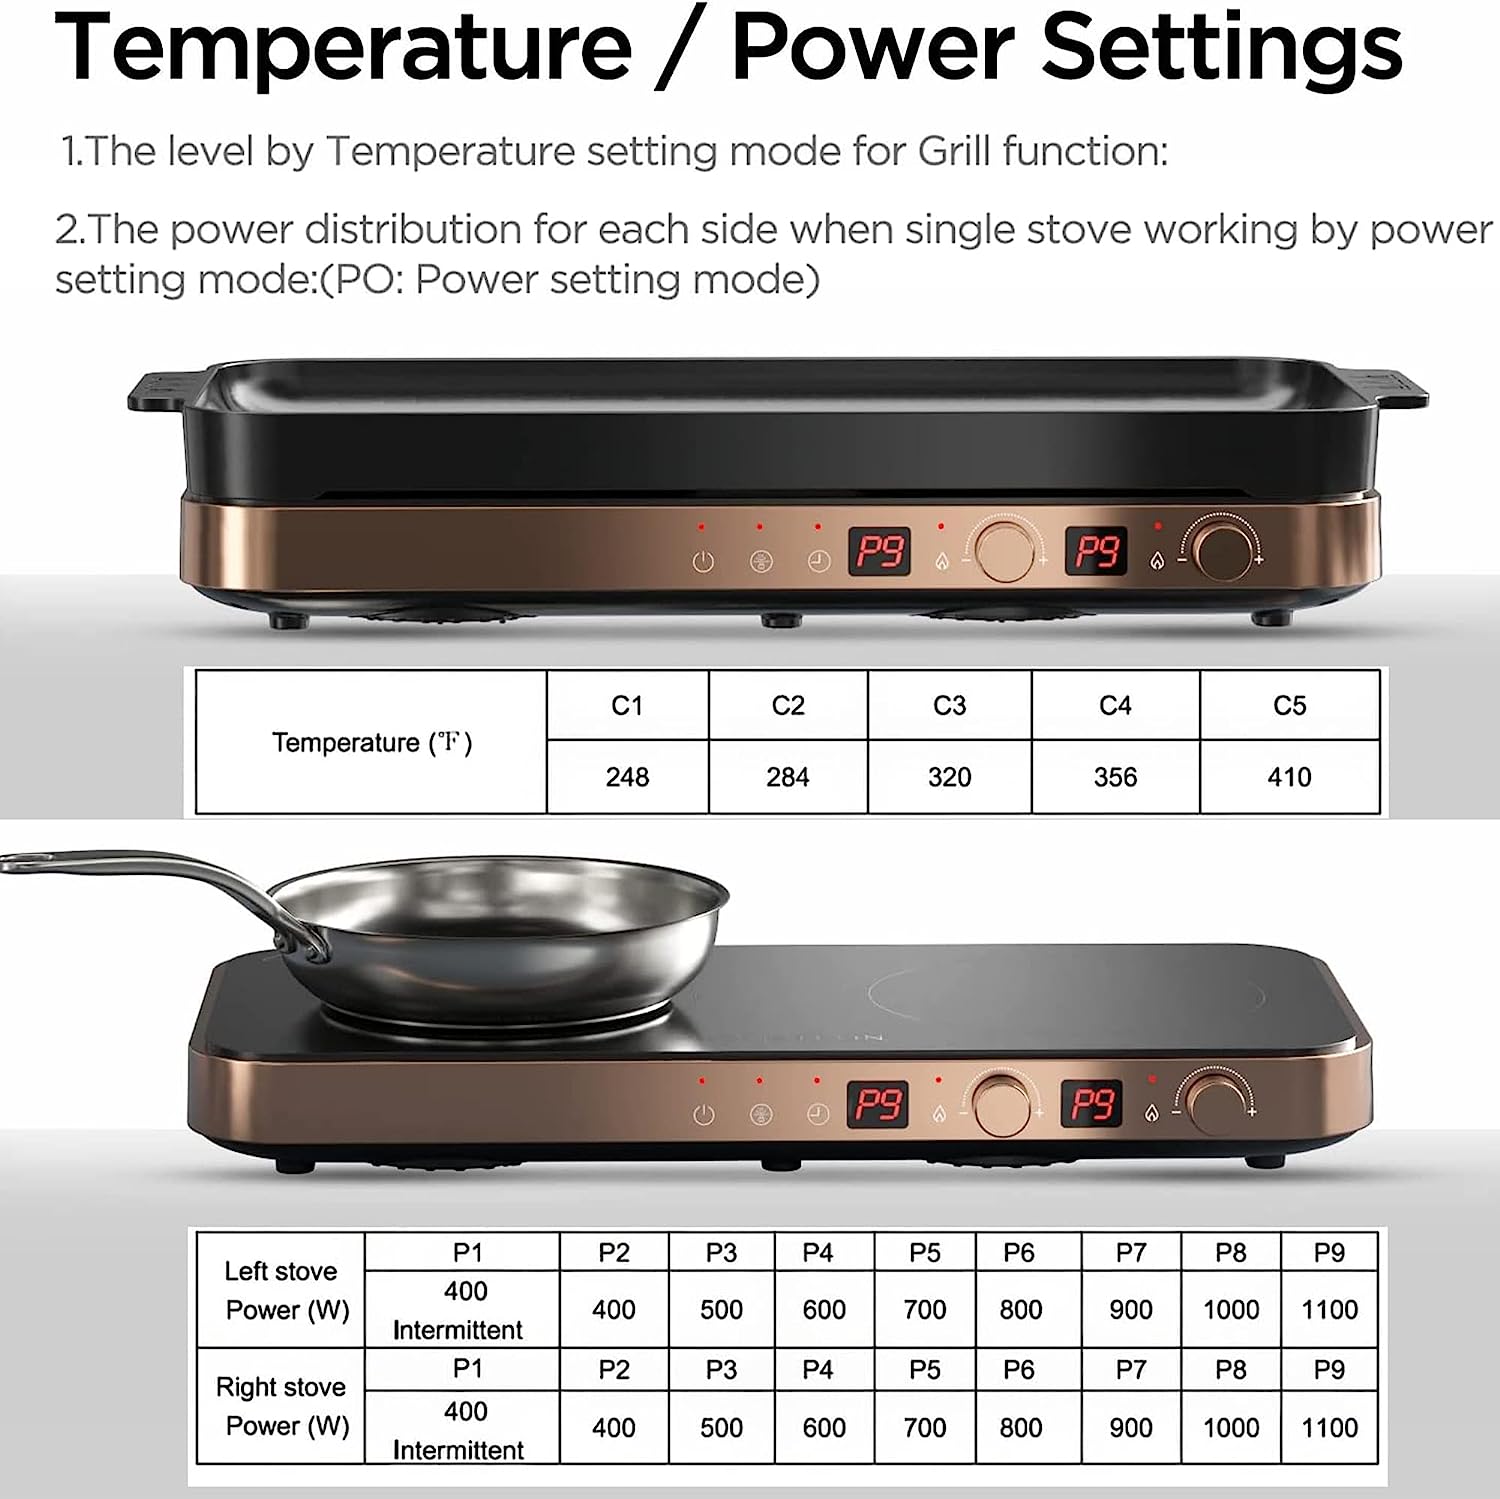 https://bigbigmart.com/wp-content/uploads/2023/07/COOKTRON-Portable-Compact-2-Burner-Induction-Cooktop-Electric-Stove-w-Smokeless-Cast-Iron-Griddle-Grill-Temperature-Control-Child-Lock-Rose-Gold4.jpg